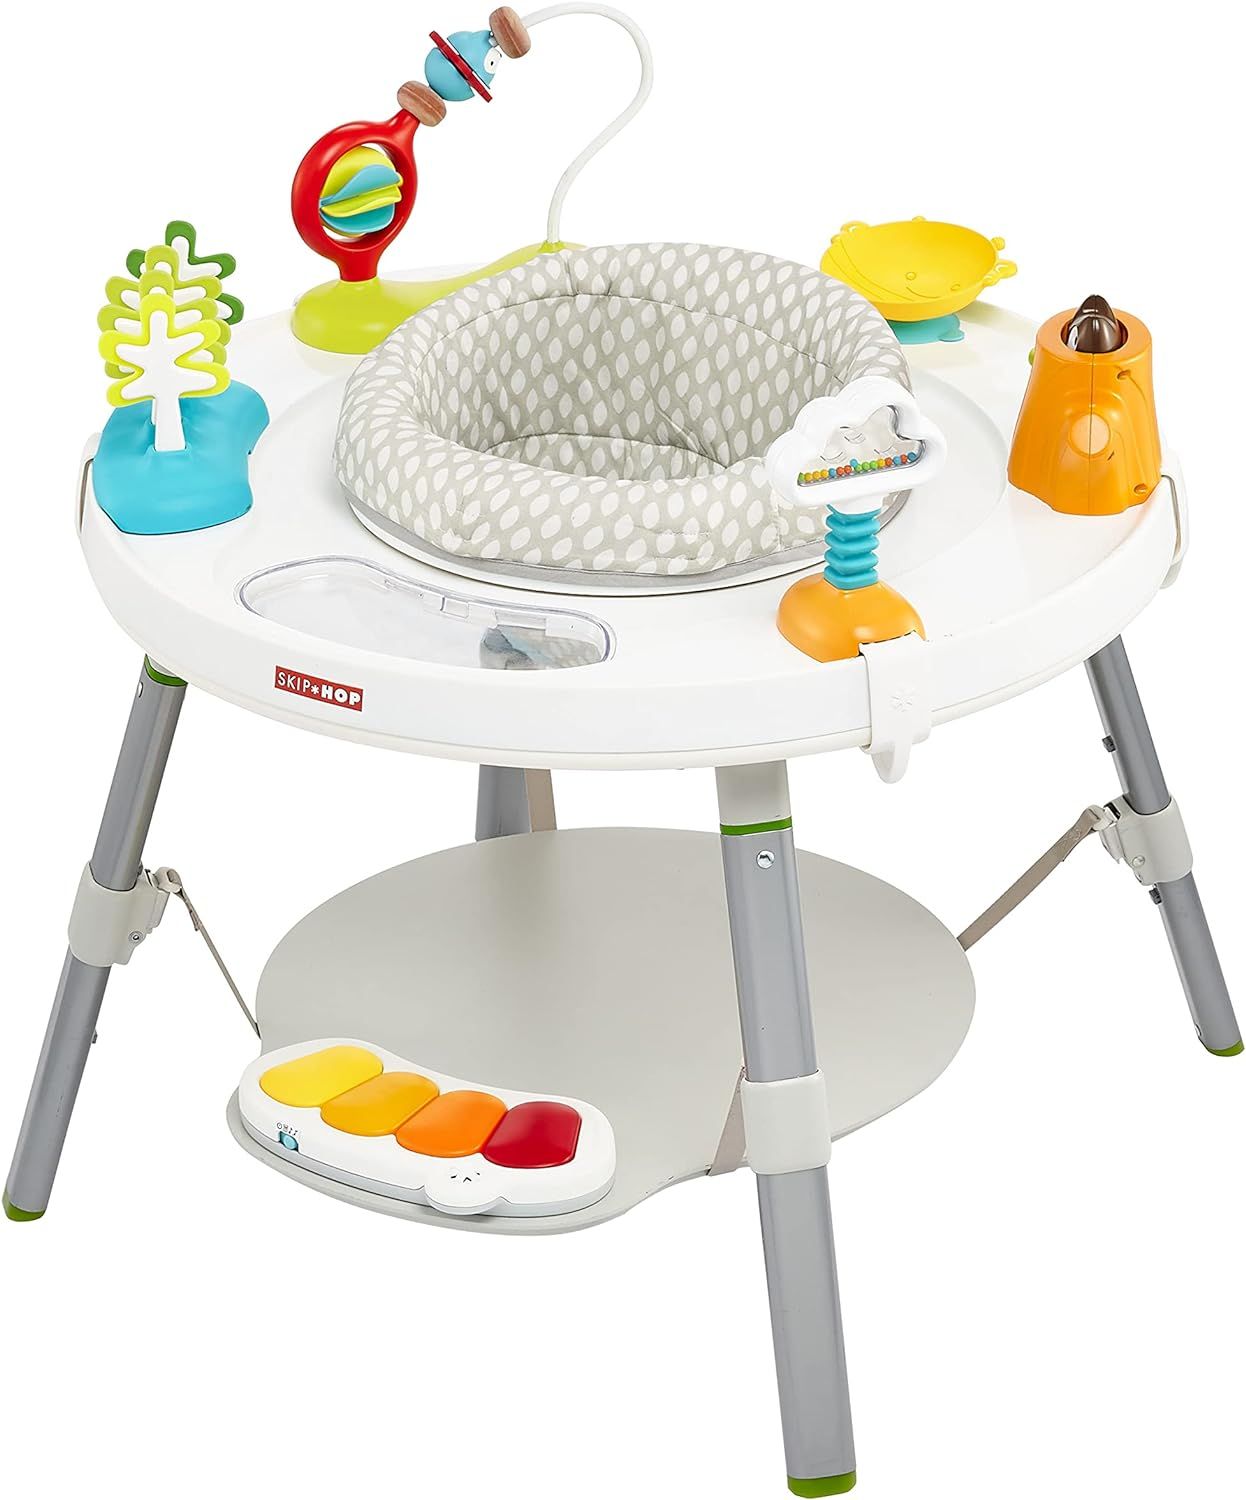 Skip Hop Baby Activity Center: Interactive Play Center with 3-Stage Grow-with-Me Functionality, 4mo+ | Amazon (US)